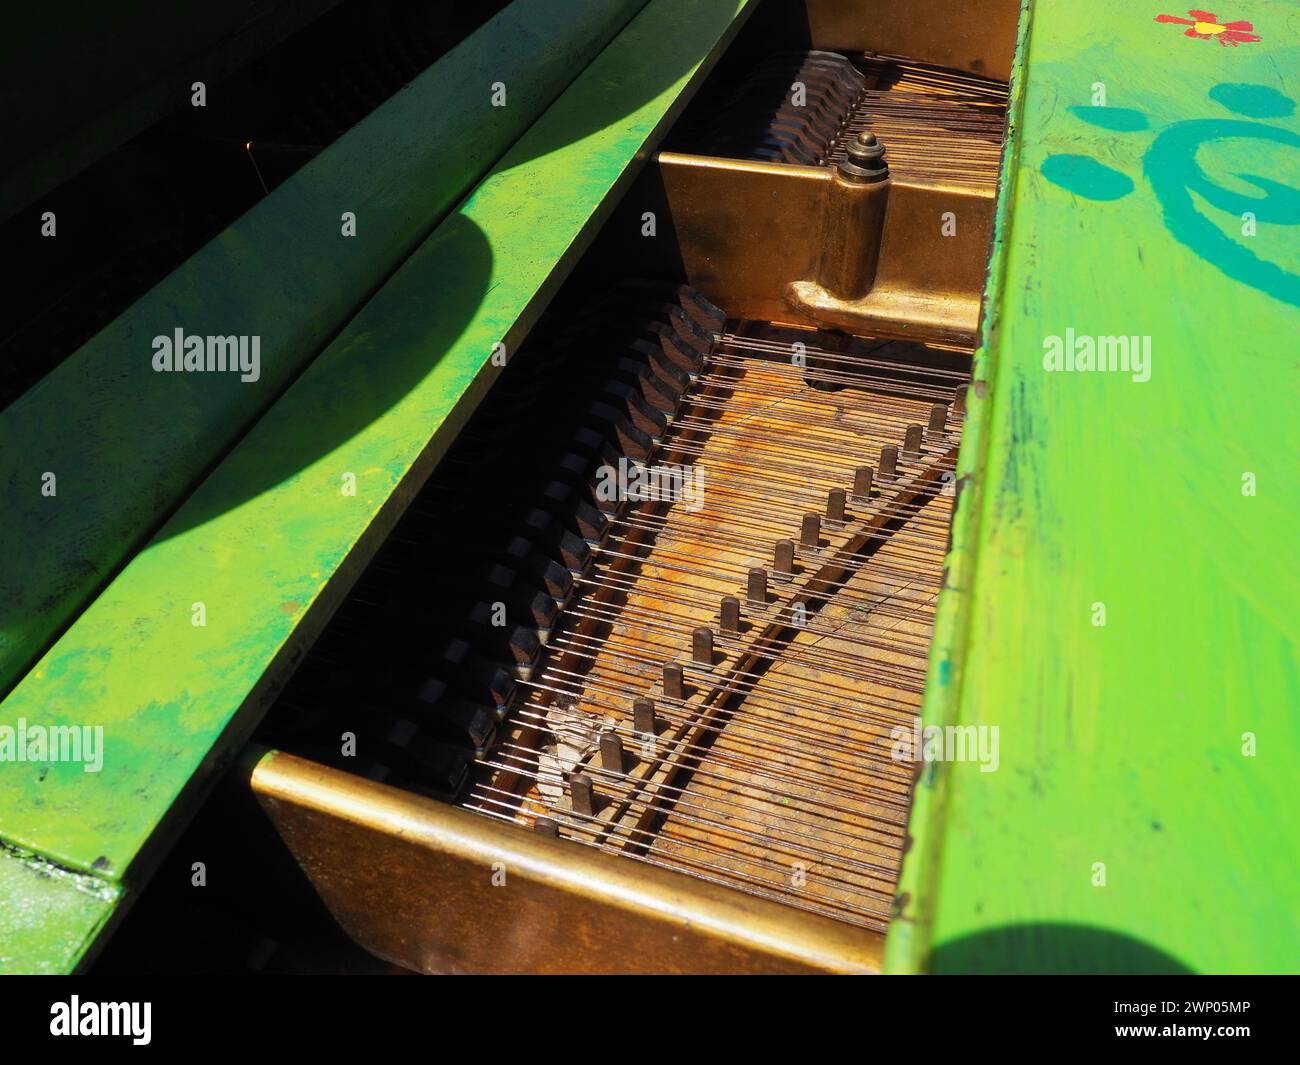 Strings, soundboard and piano mechanics. Piano on the street. Piano painted green. Performance of a piece of music. Street concert on a summer sunny Stock Photo